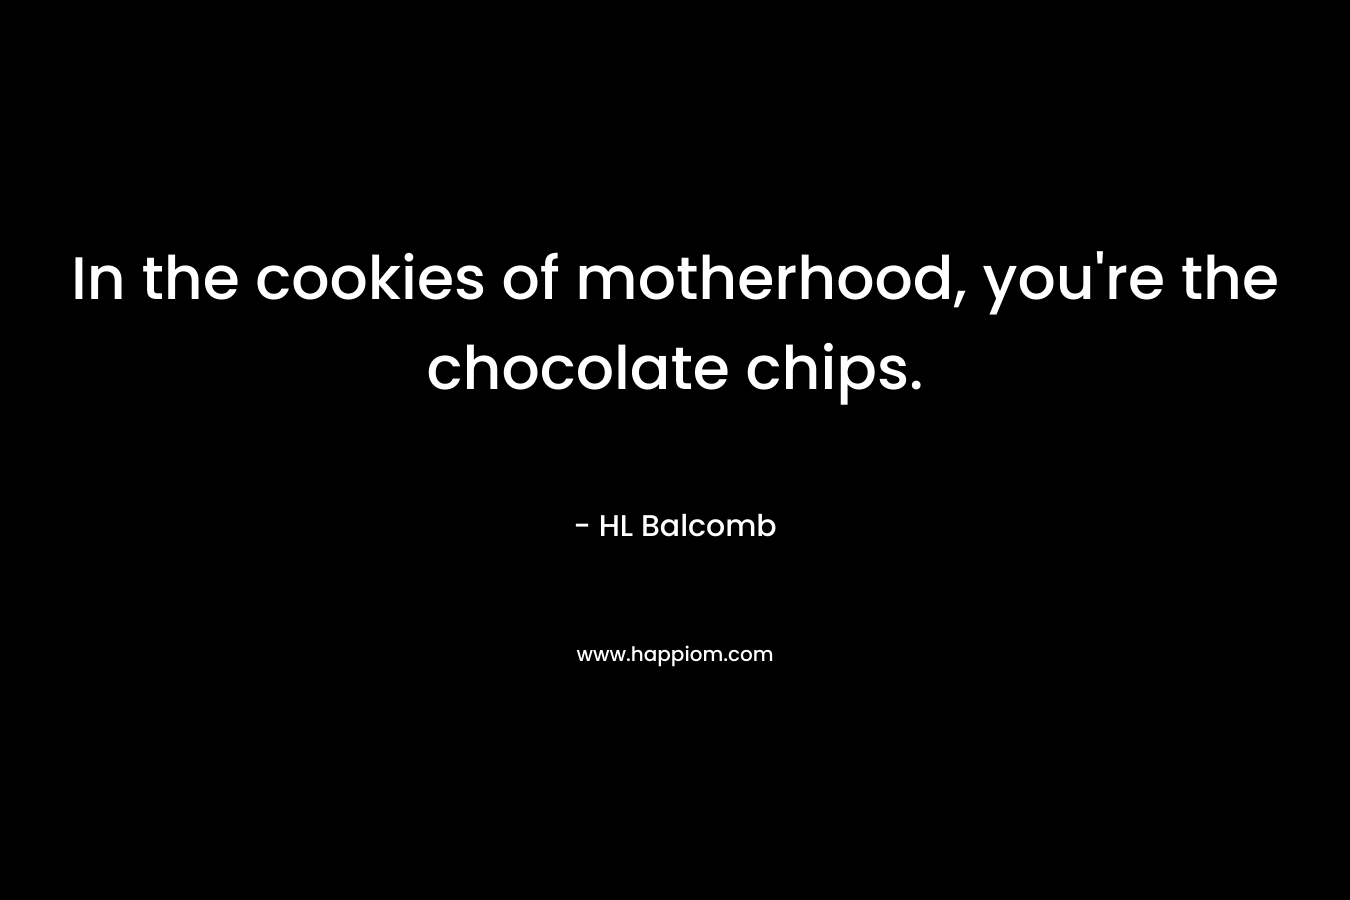 In the cookies of motherhood, you're the chocolate chips.